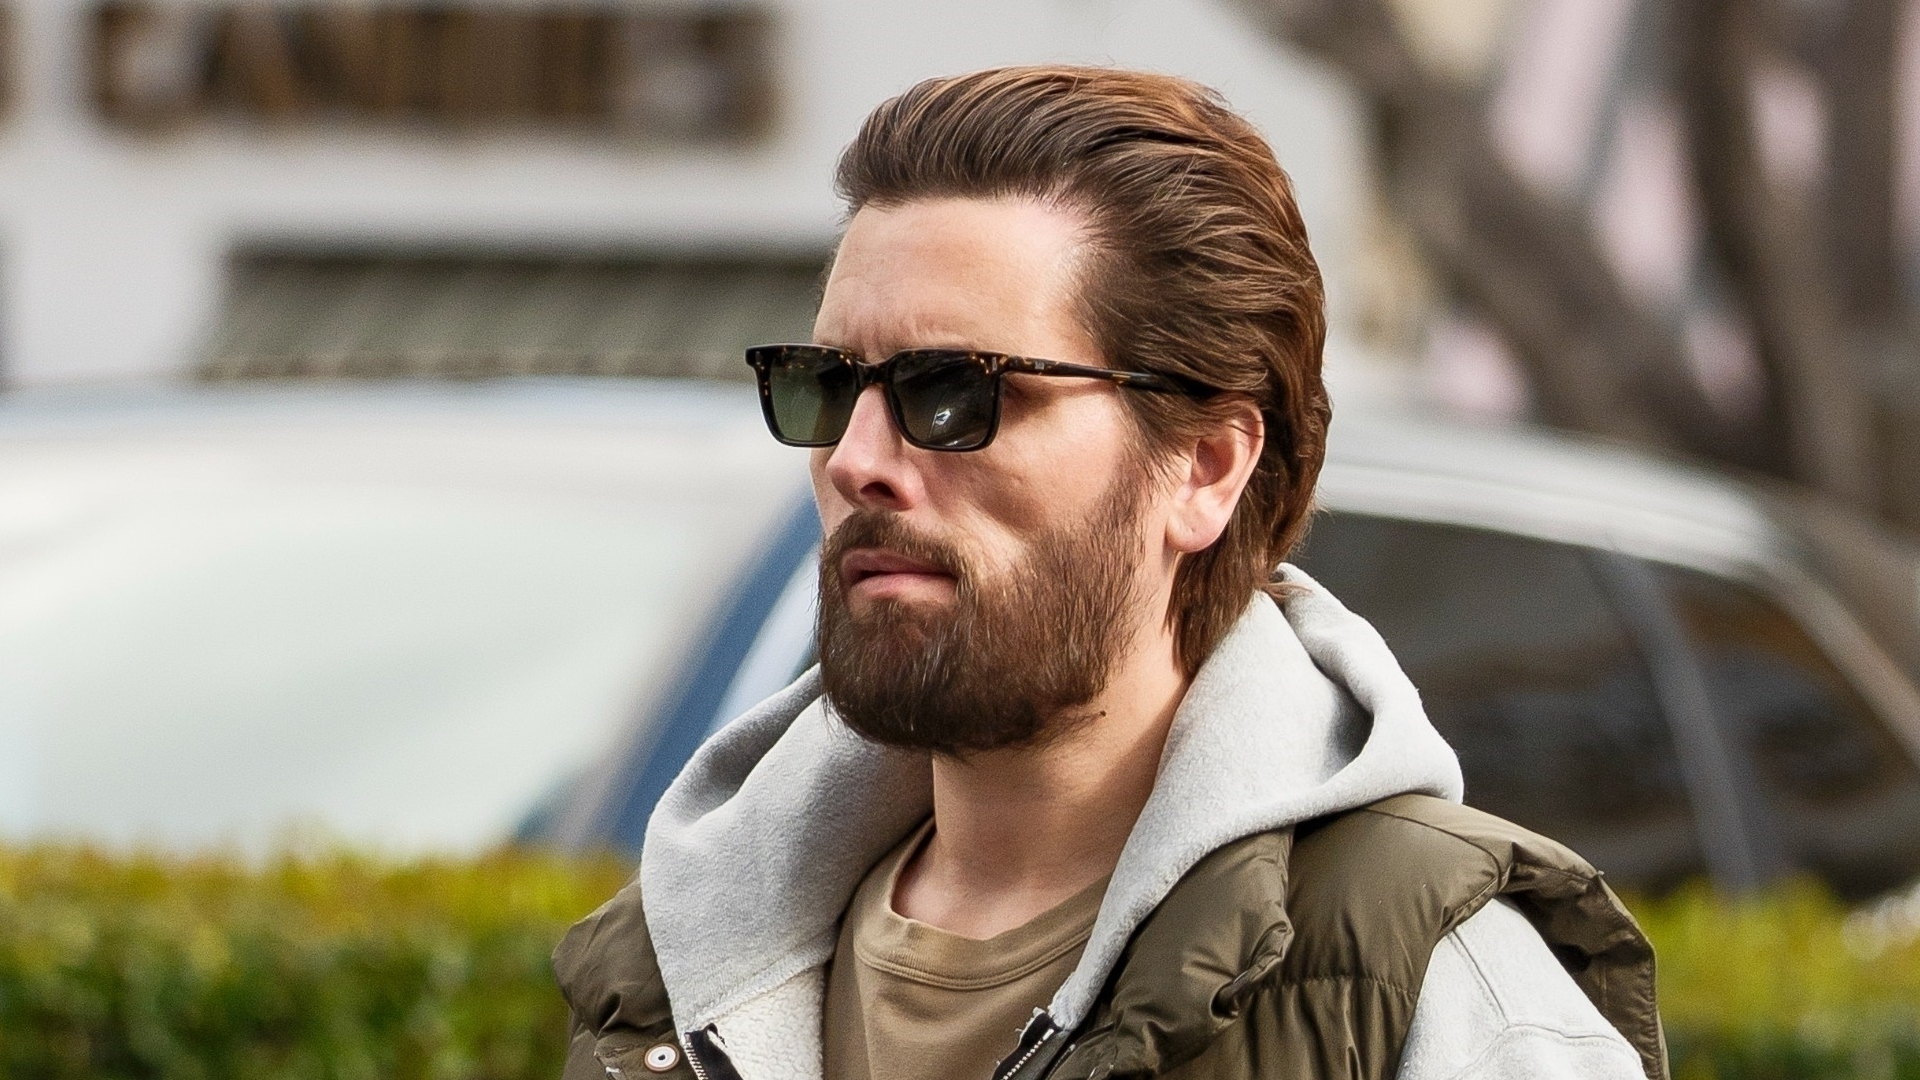 Shocking: Scott Disick’s Drastic Weight Loss Sparks Concerns as He Steps Out with Rumored Girlfriend Mary-Grayson Hunt, 25